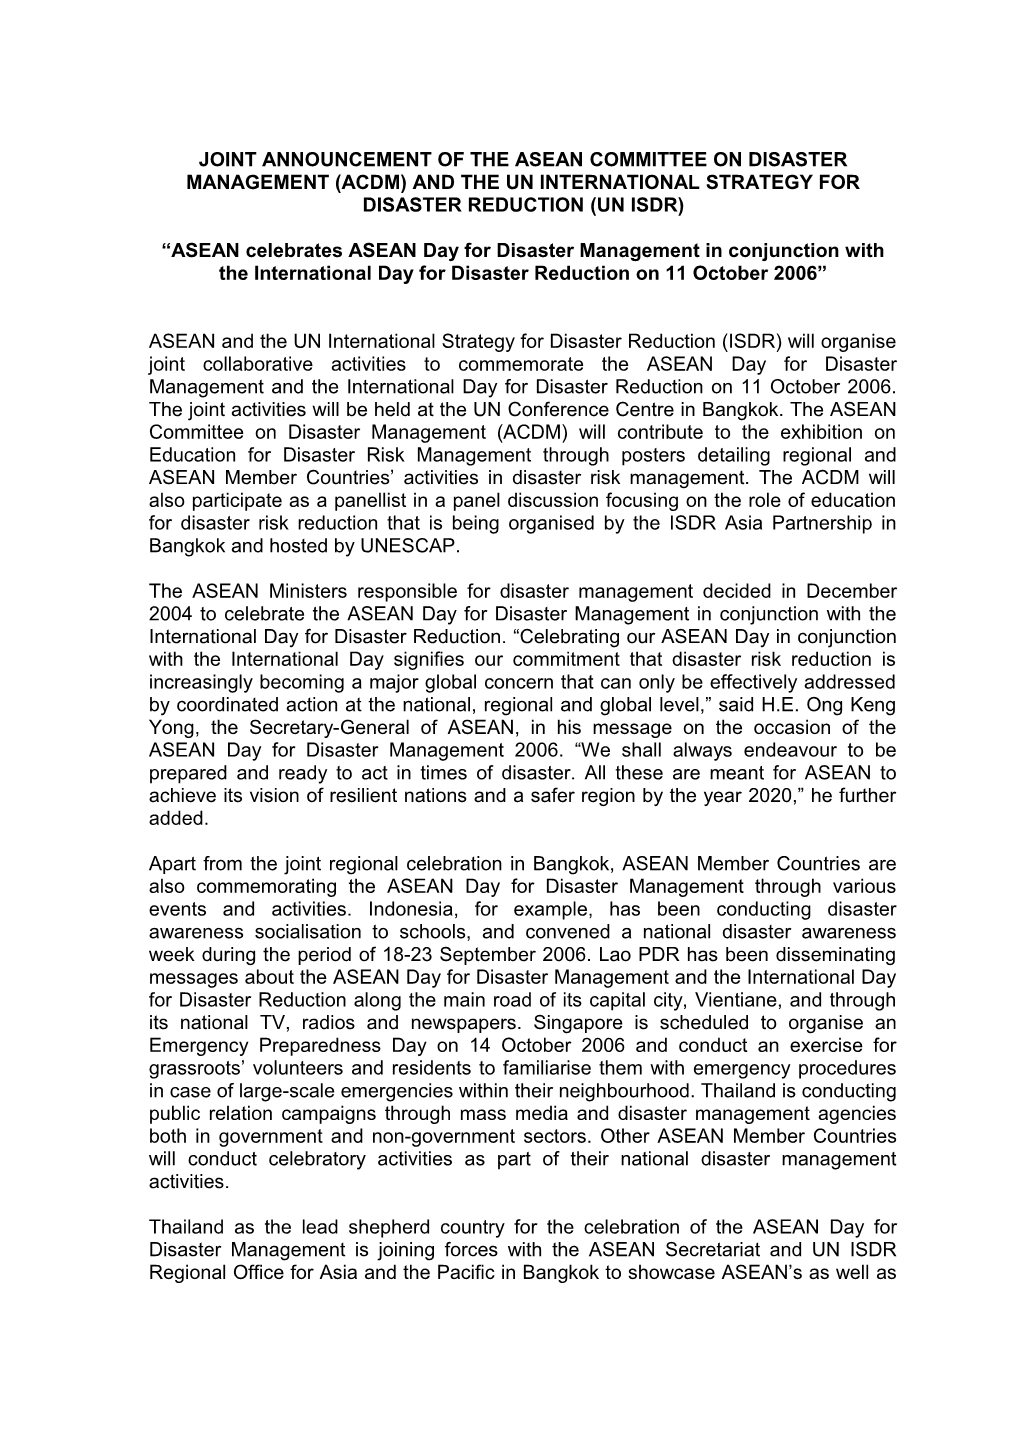 Joint Announcement of the Asean Committee on Disaster Management (Acdm) and Un International